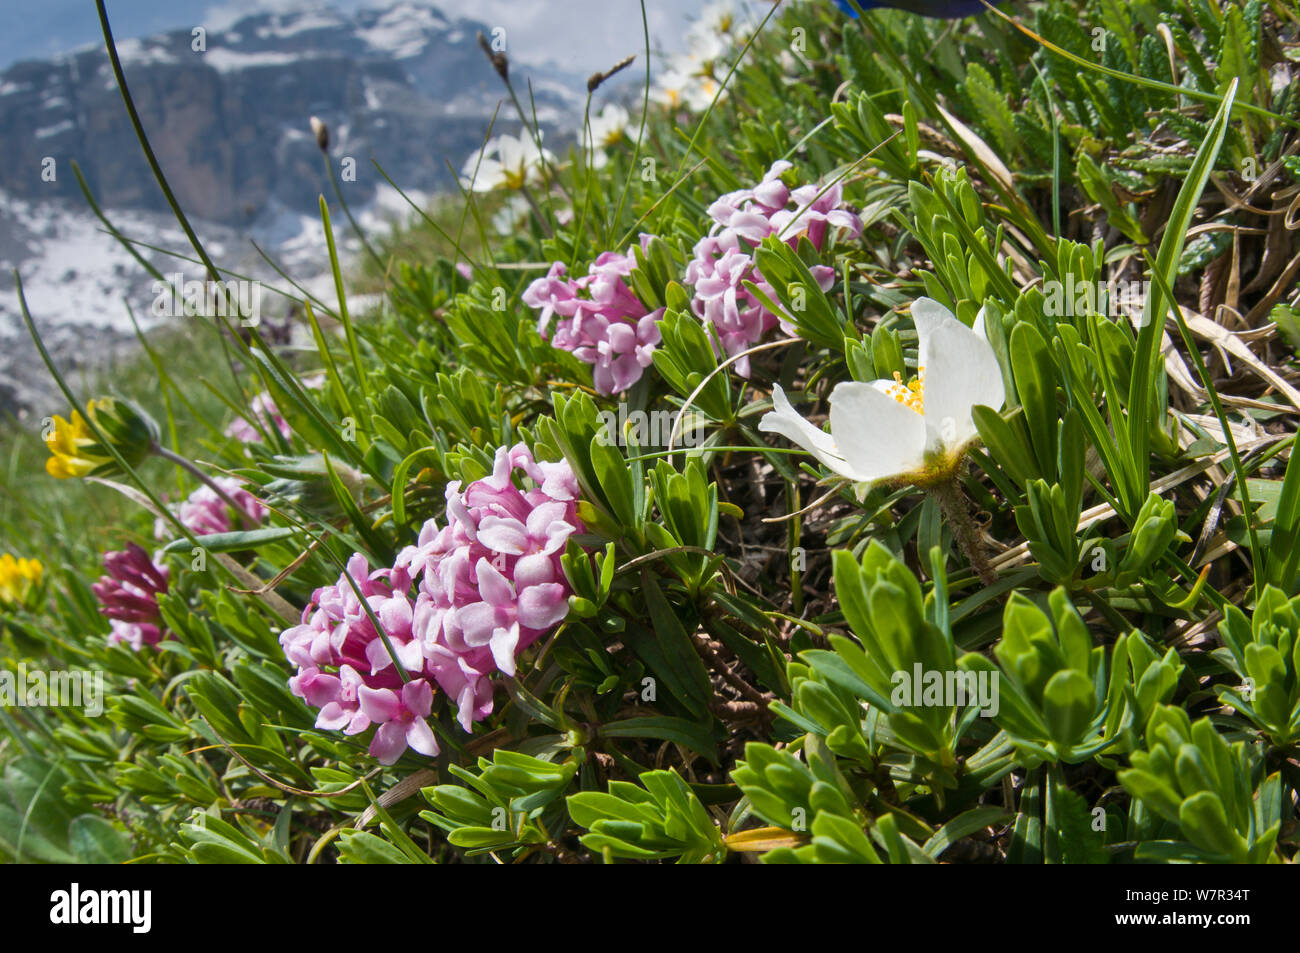 Garland flower (Daphne cneorum) in flower with Mountain Avens (Dryas octopetala), Monte Spinale, alpine zone, Madonna di Campiglio, Brenta Dolomites, Italy, July Stock Photo